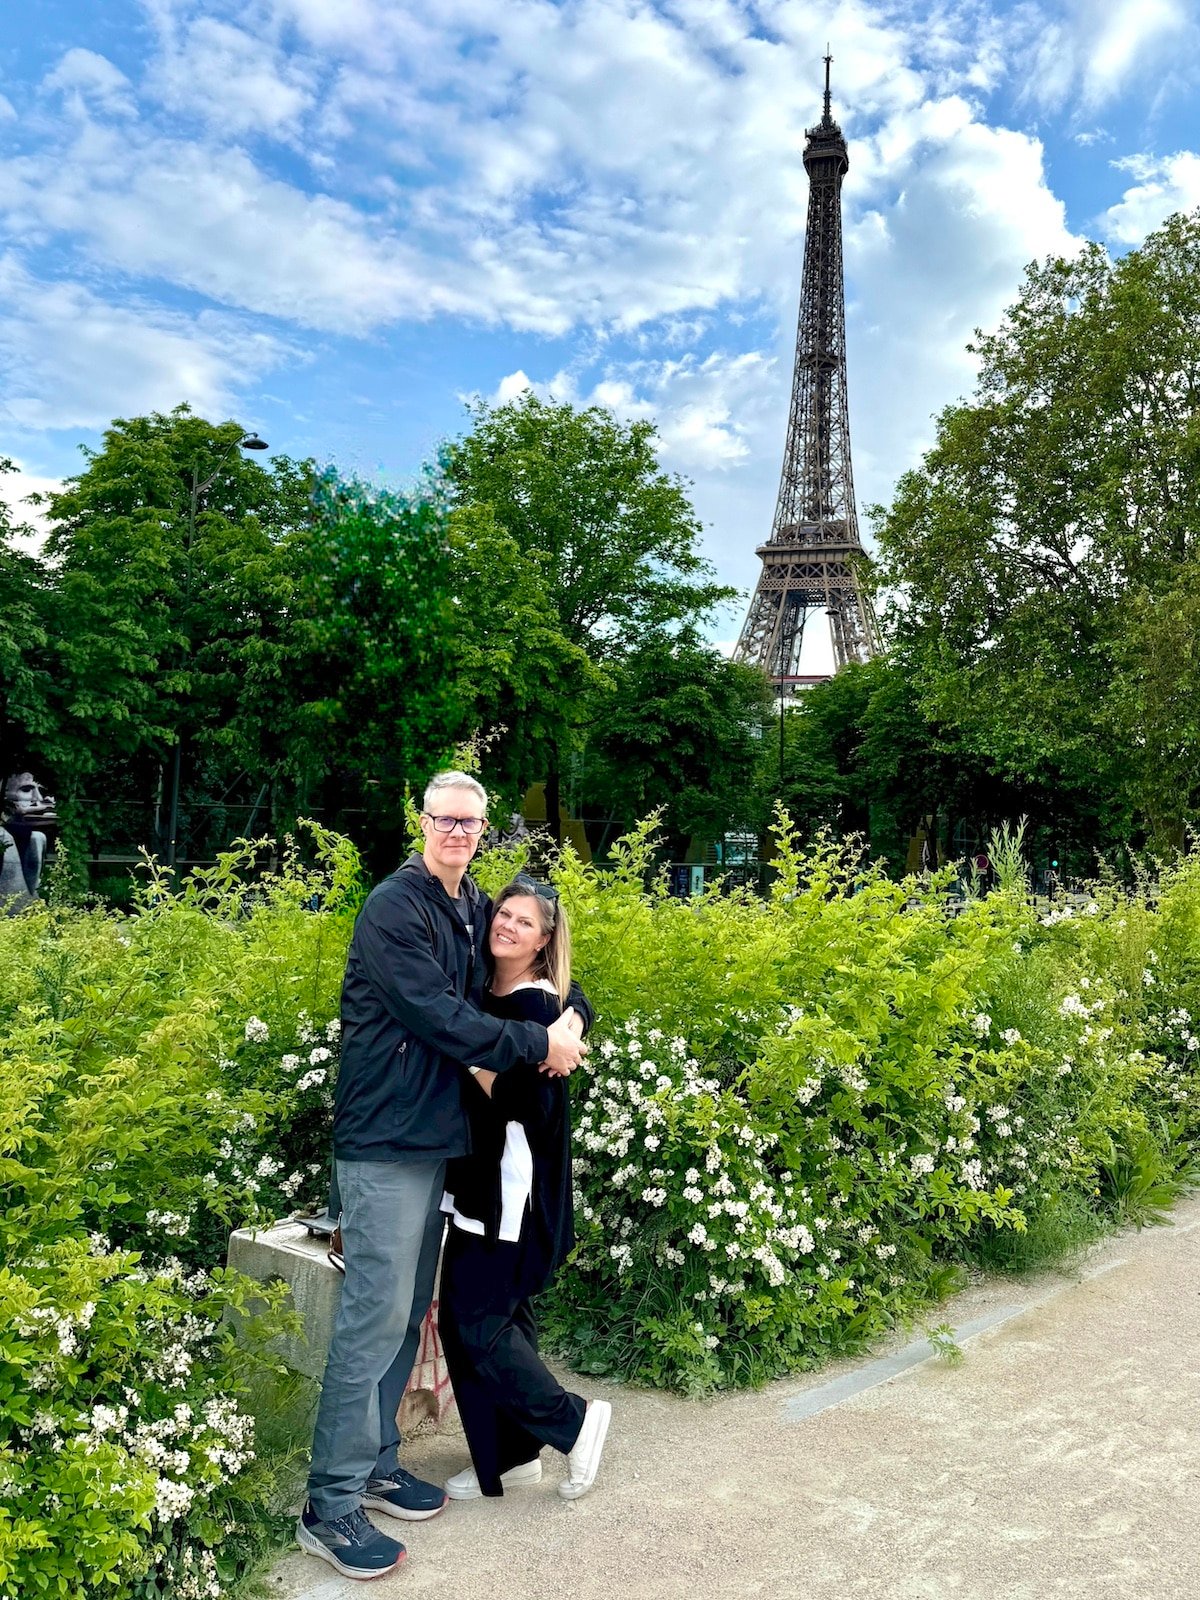 A man and a woman stand together hugging in front of a lush green garden with the Eiffel Tower in the background, capturing their one day in Paris on a clear day.